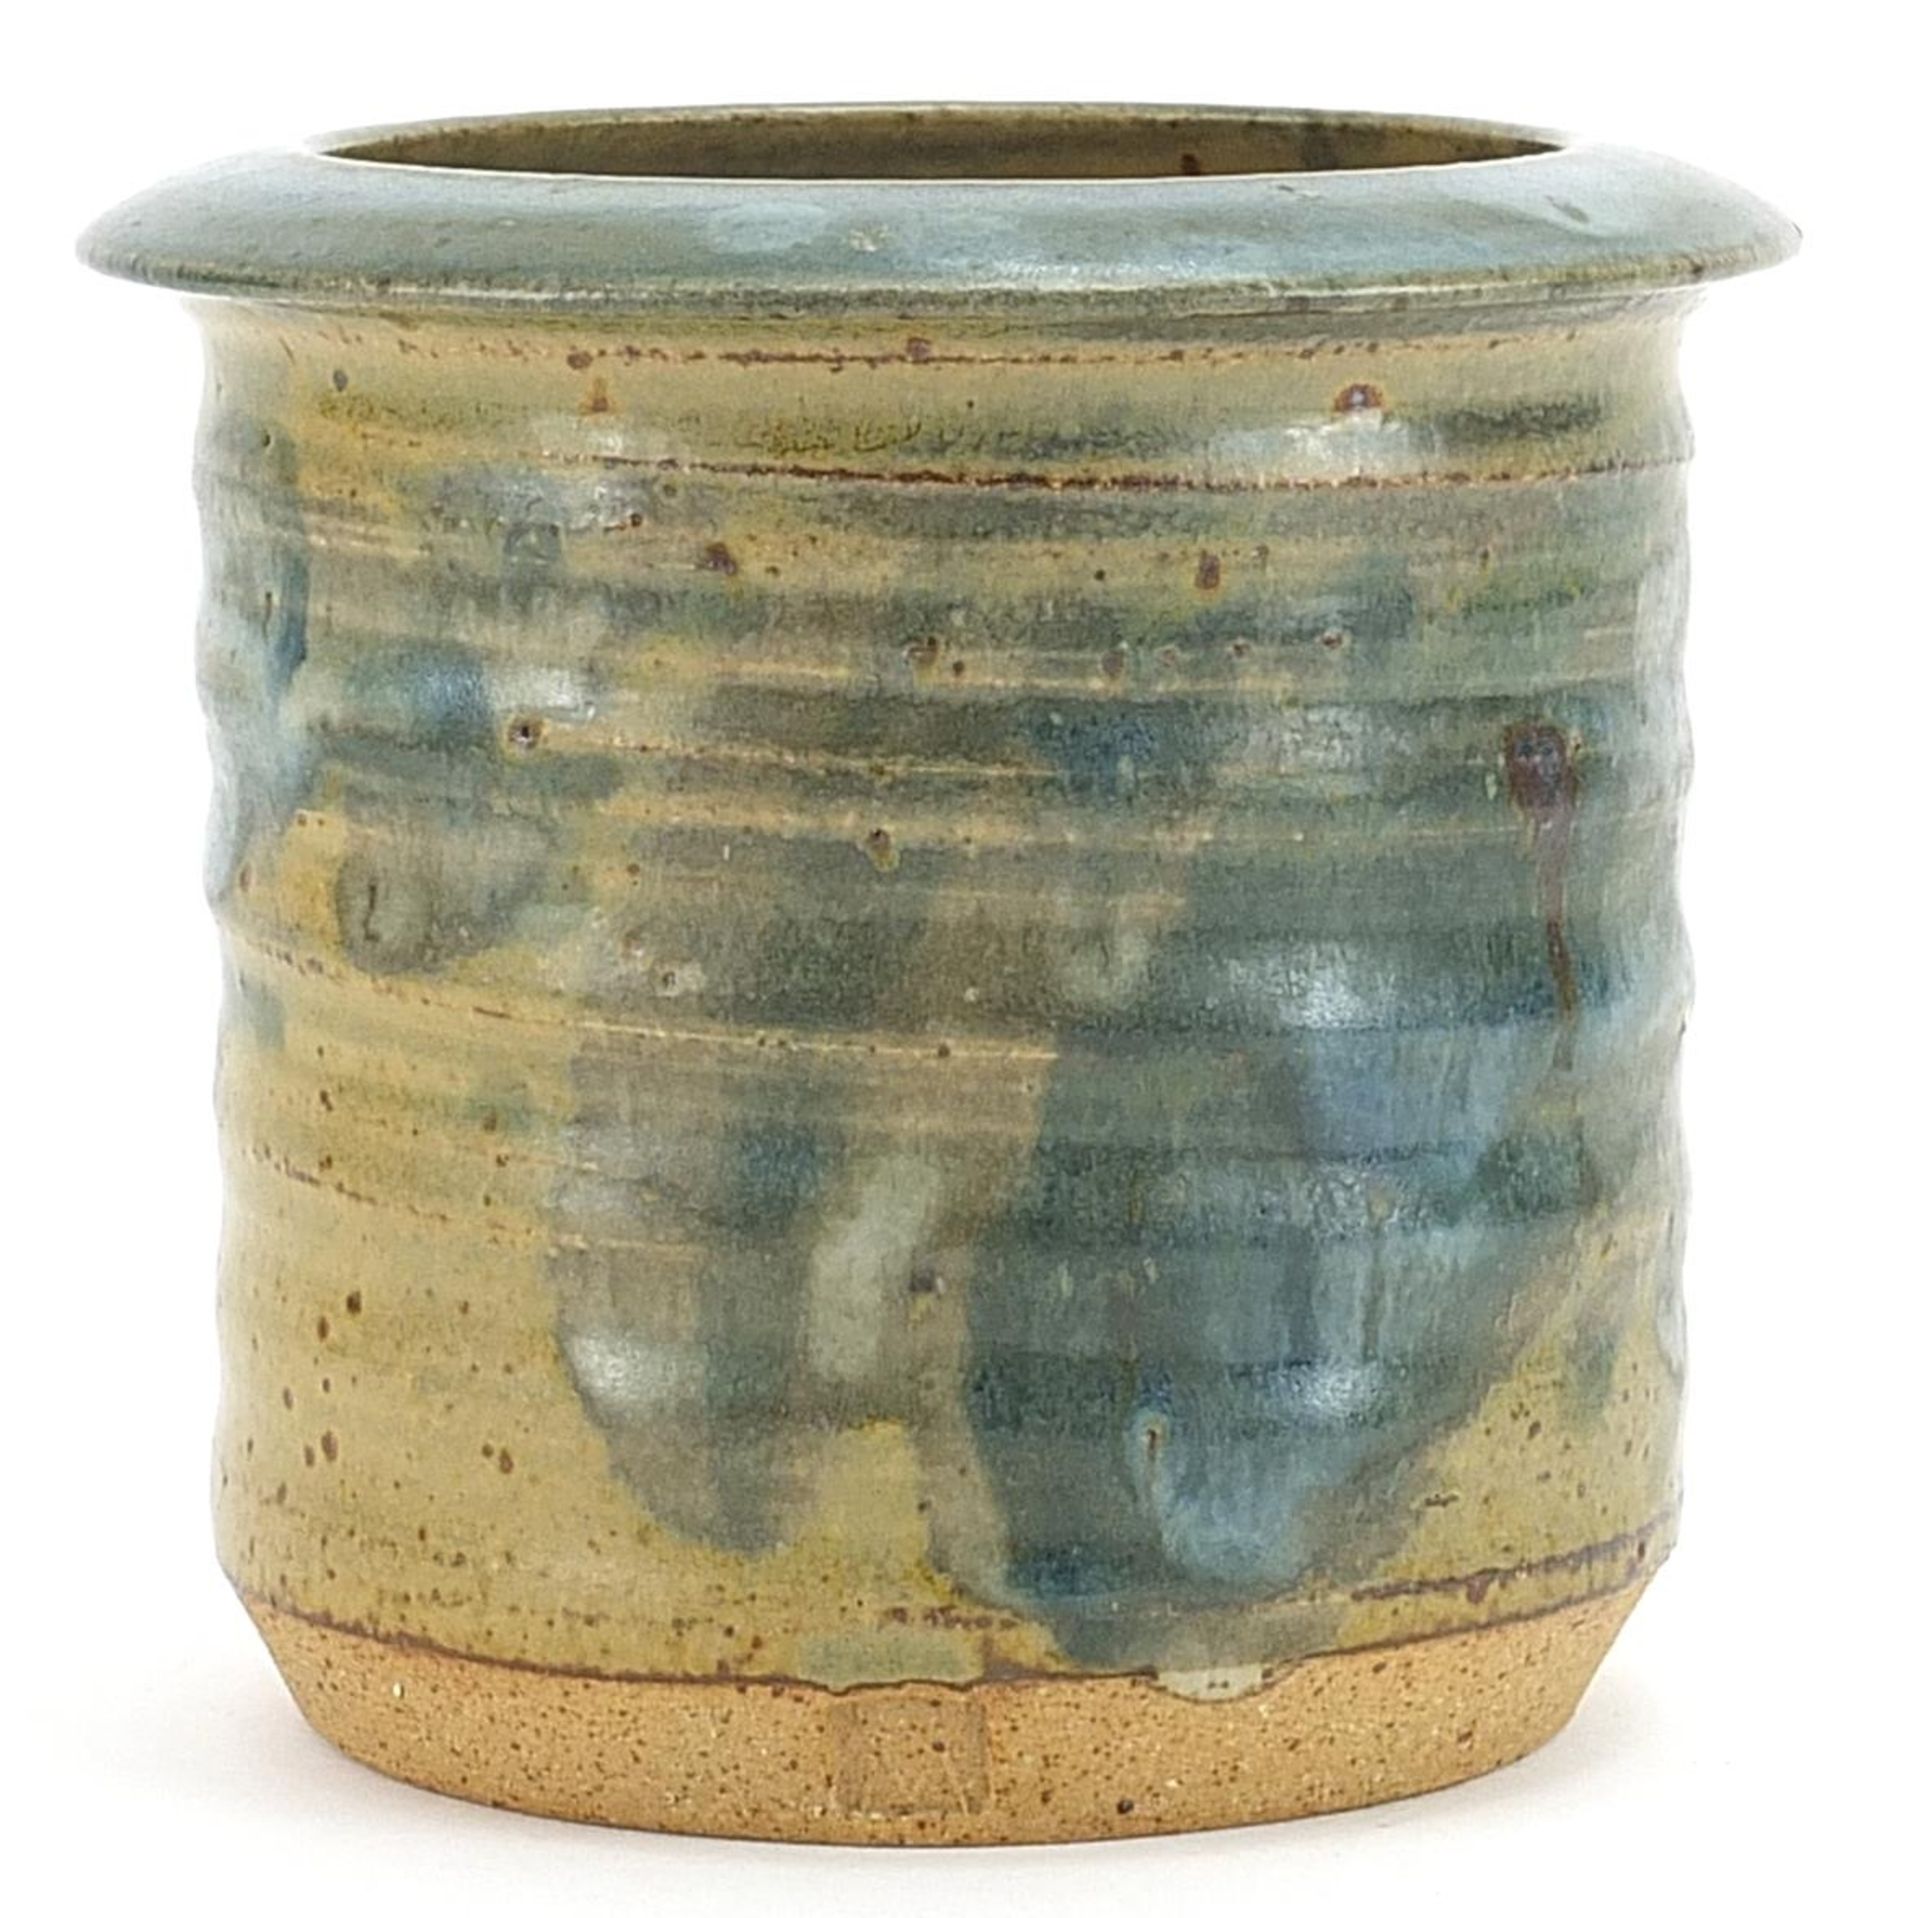 Michael Casson, studio pottery ribbed vase with impressed mark around the foot rim, 12cm high - Image 2 of 4